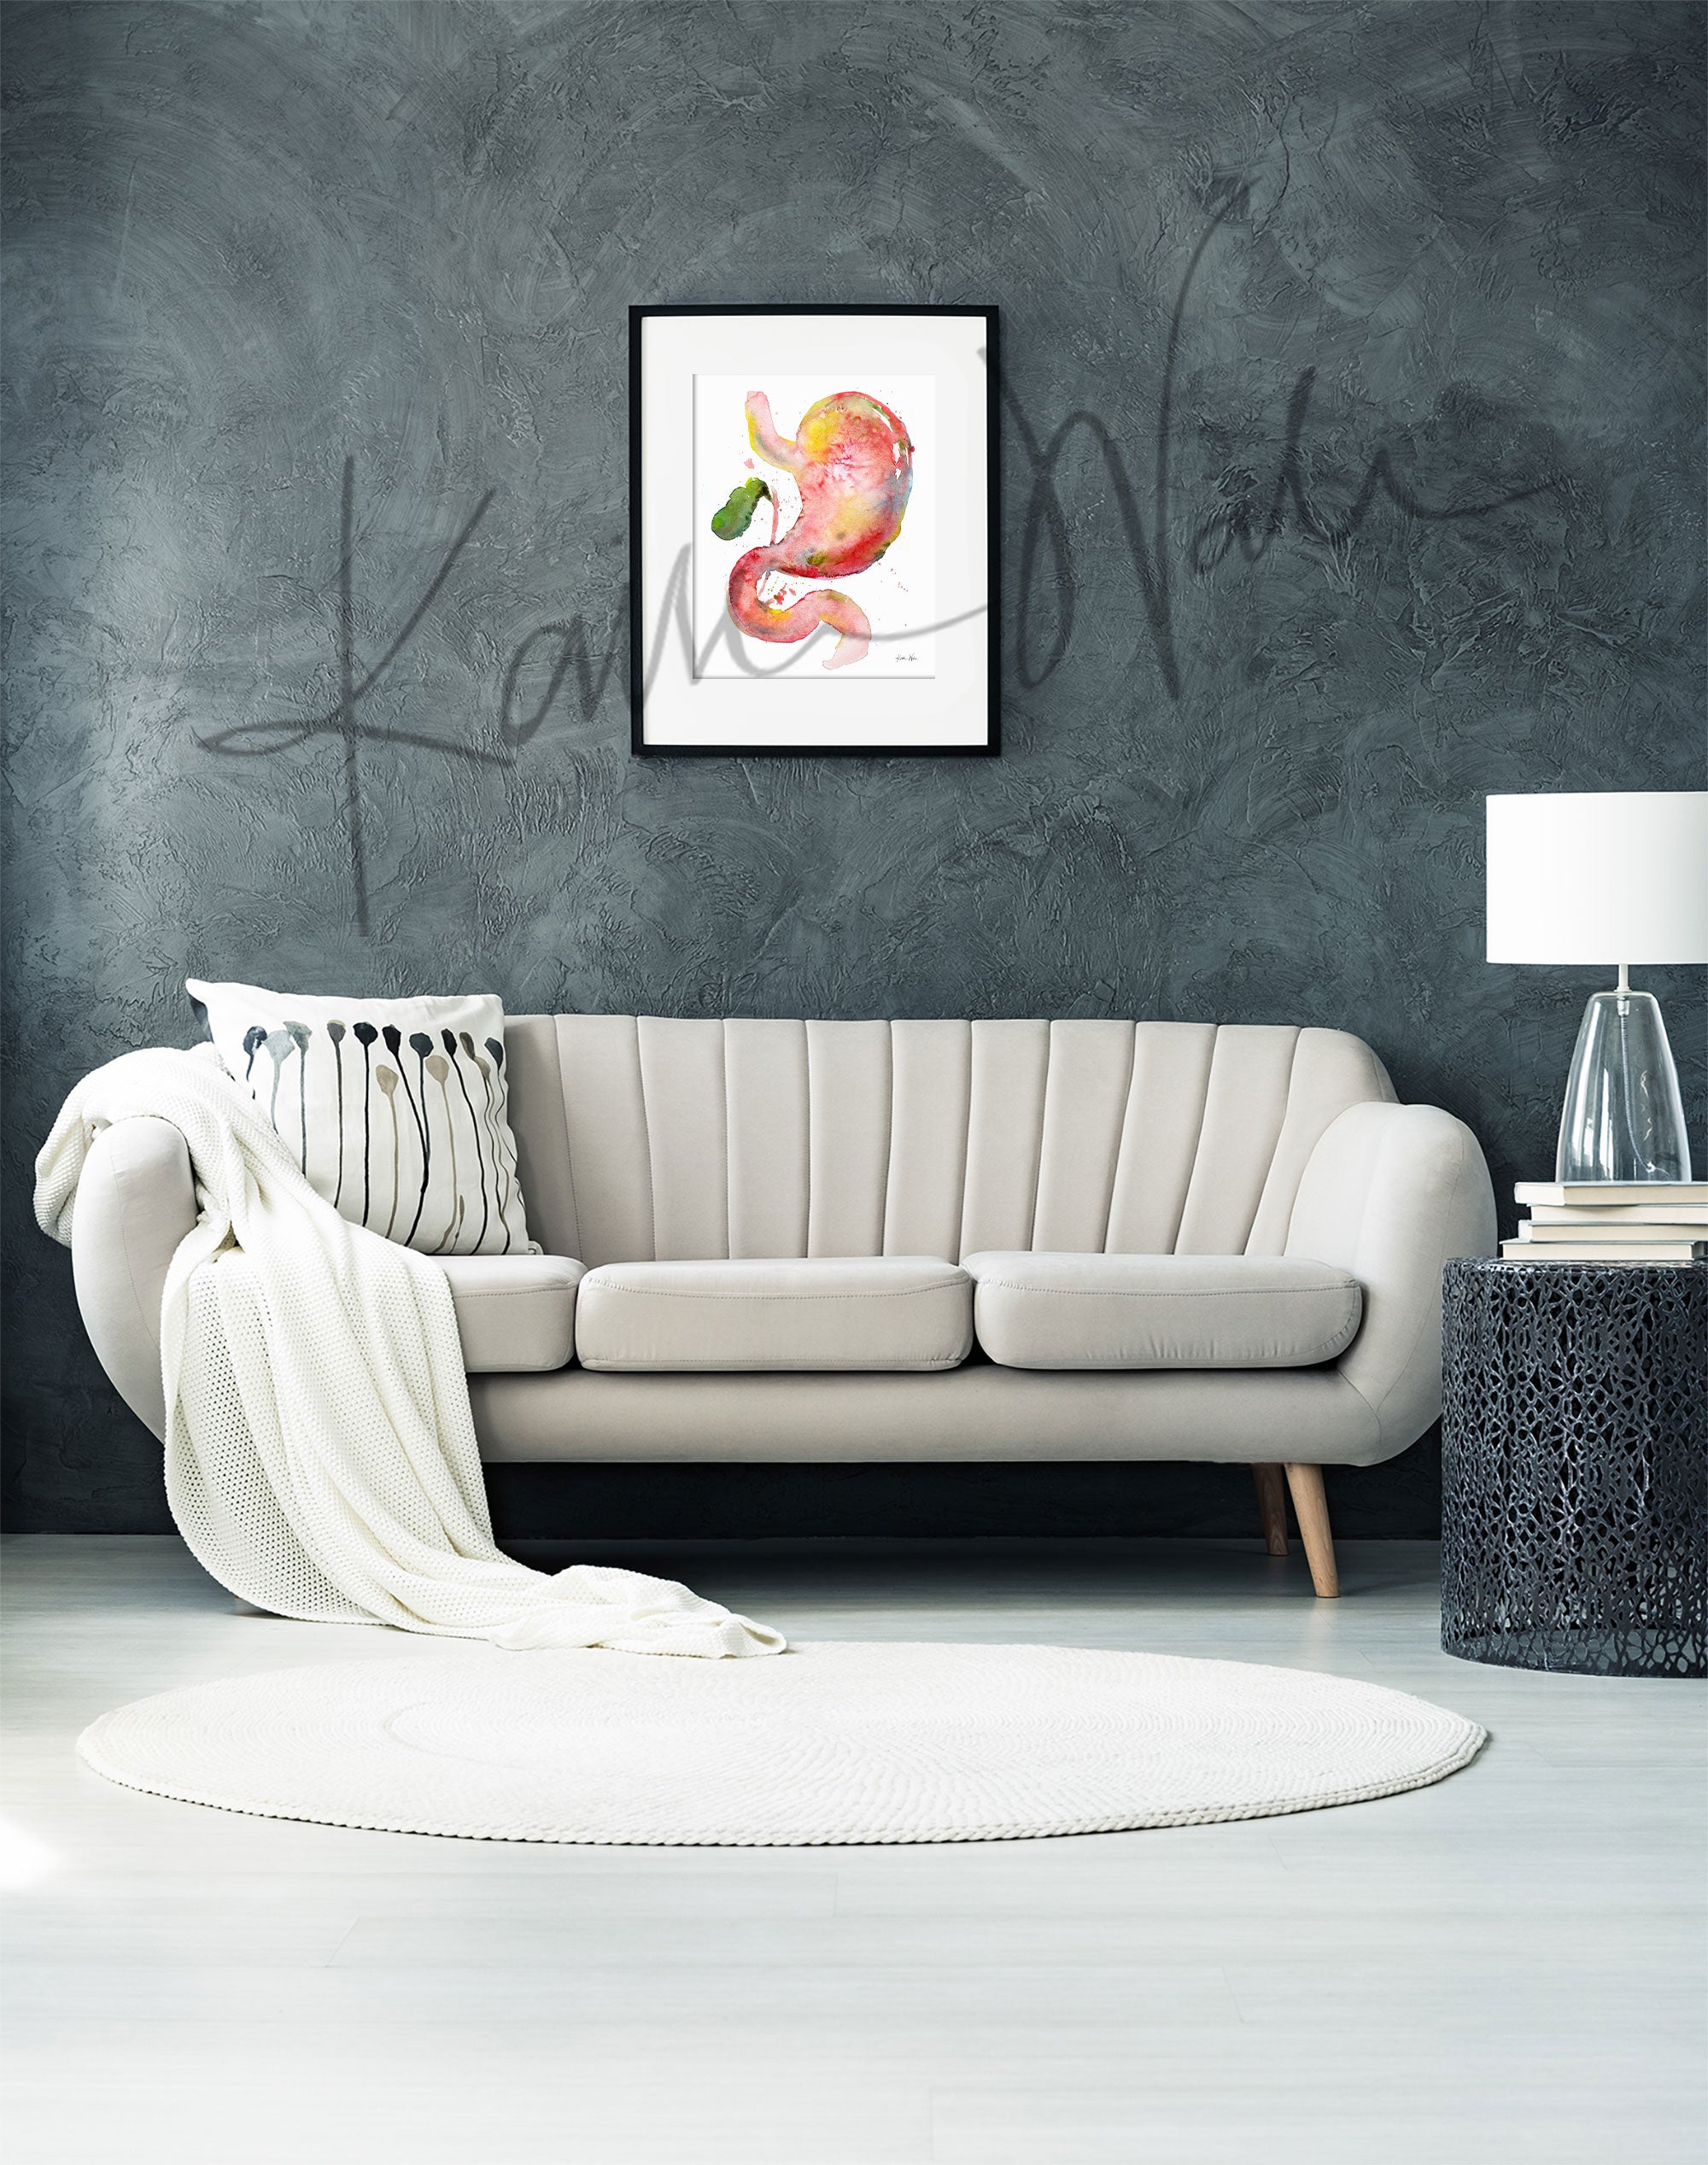 Framed watercolor painting of a stomach, duodenum, and gallbladder combination. The painting is hanging over a white couch.